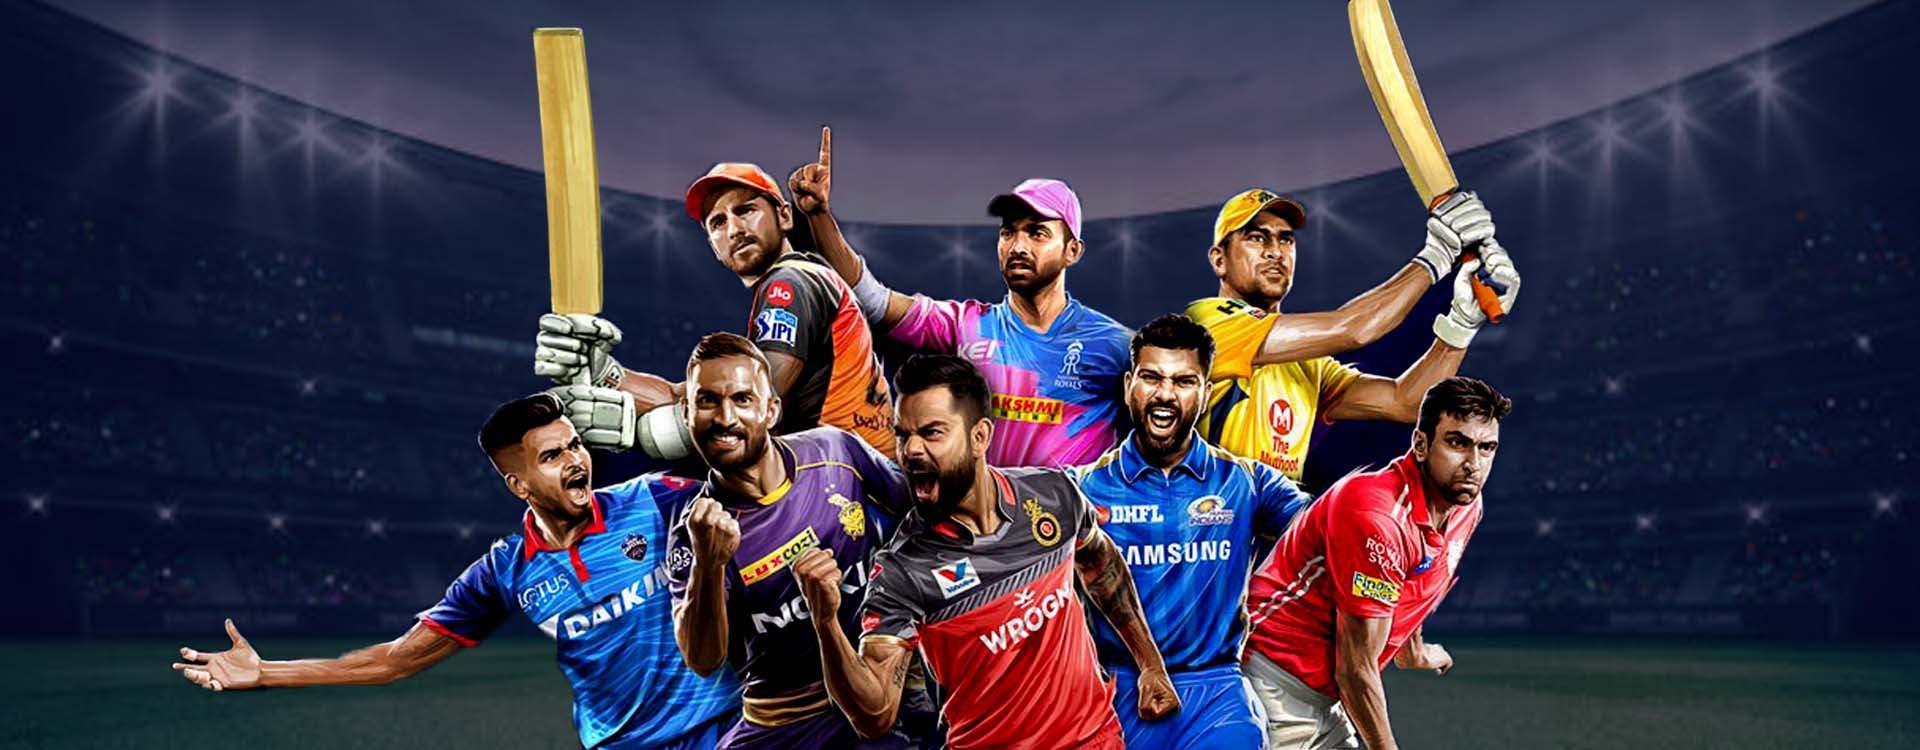 IPL: The Biggest Sporting Tournament of the Year